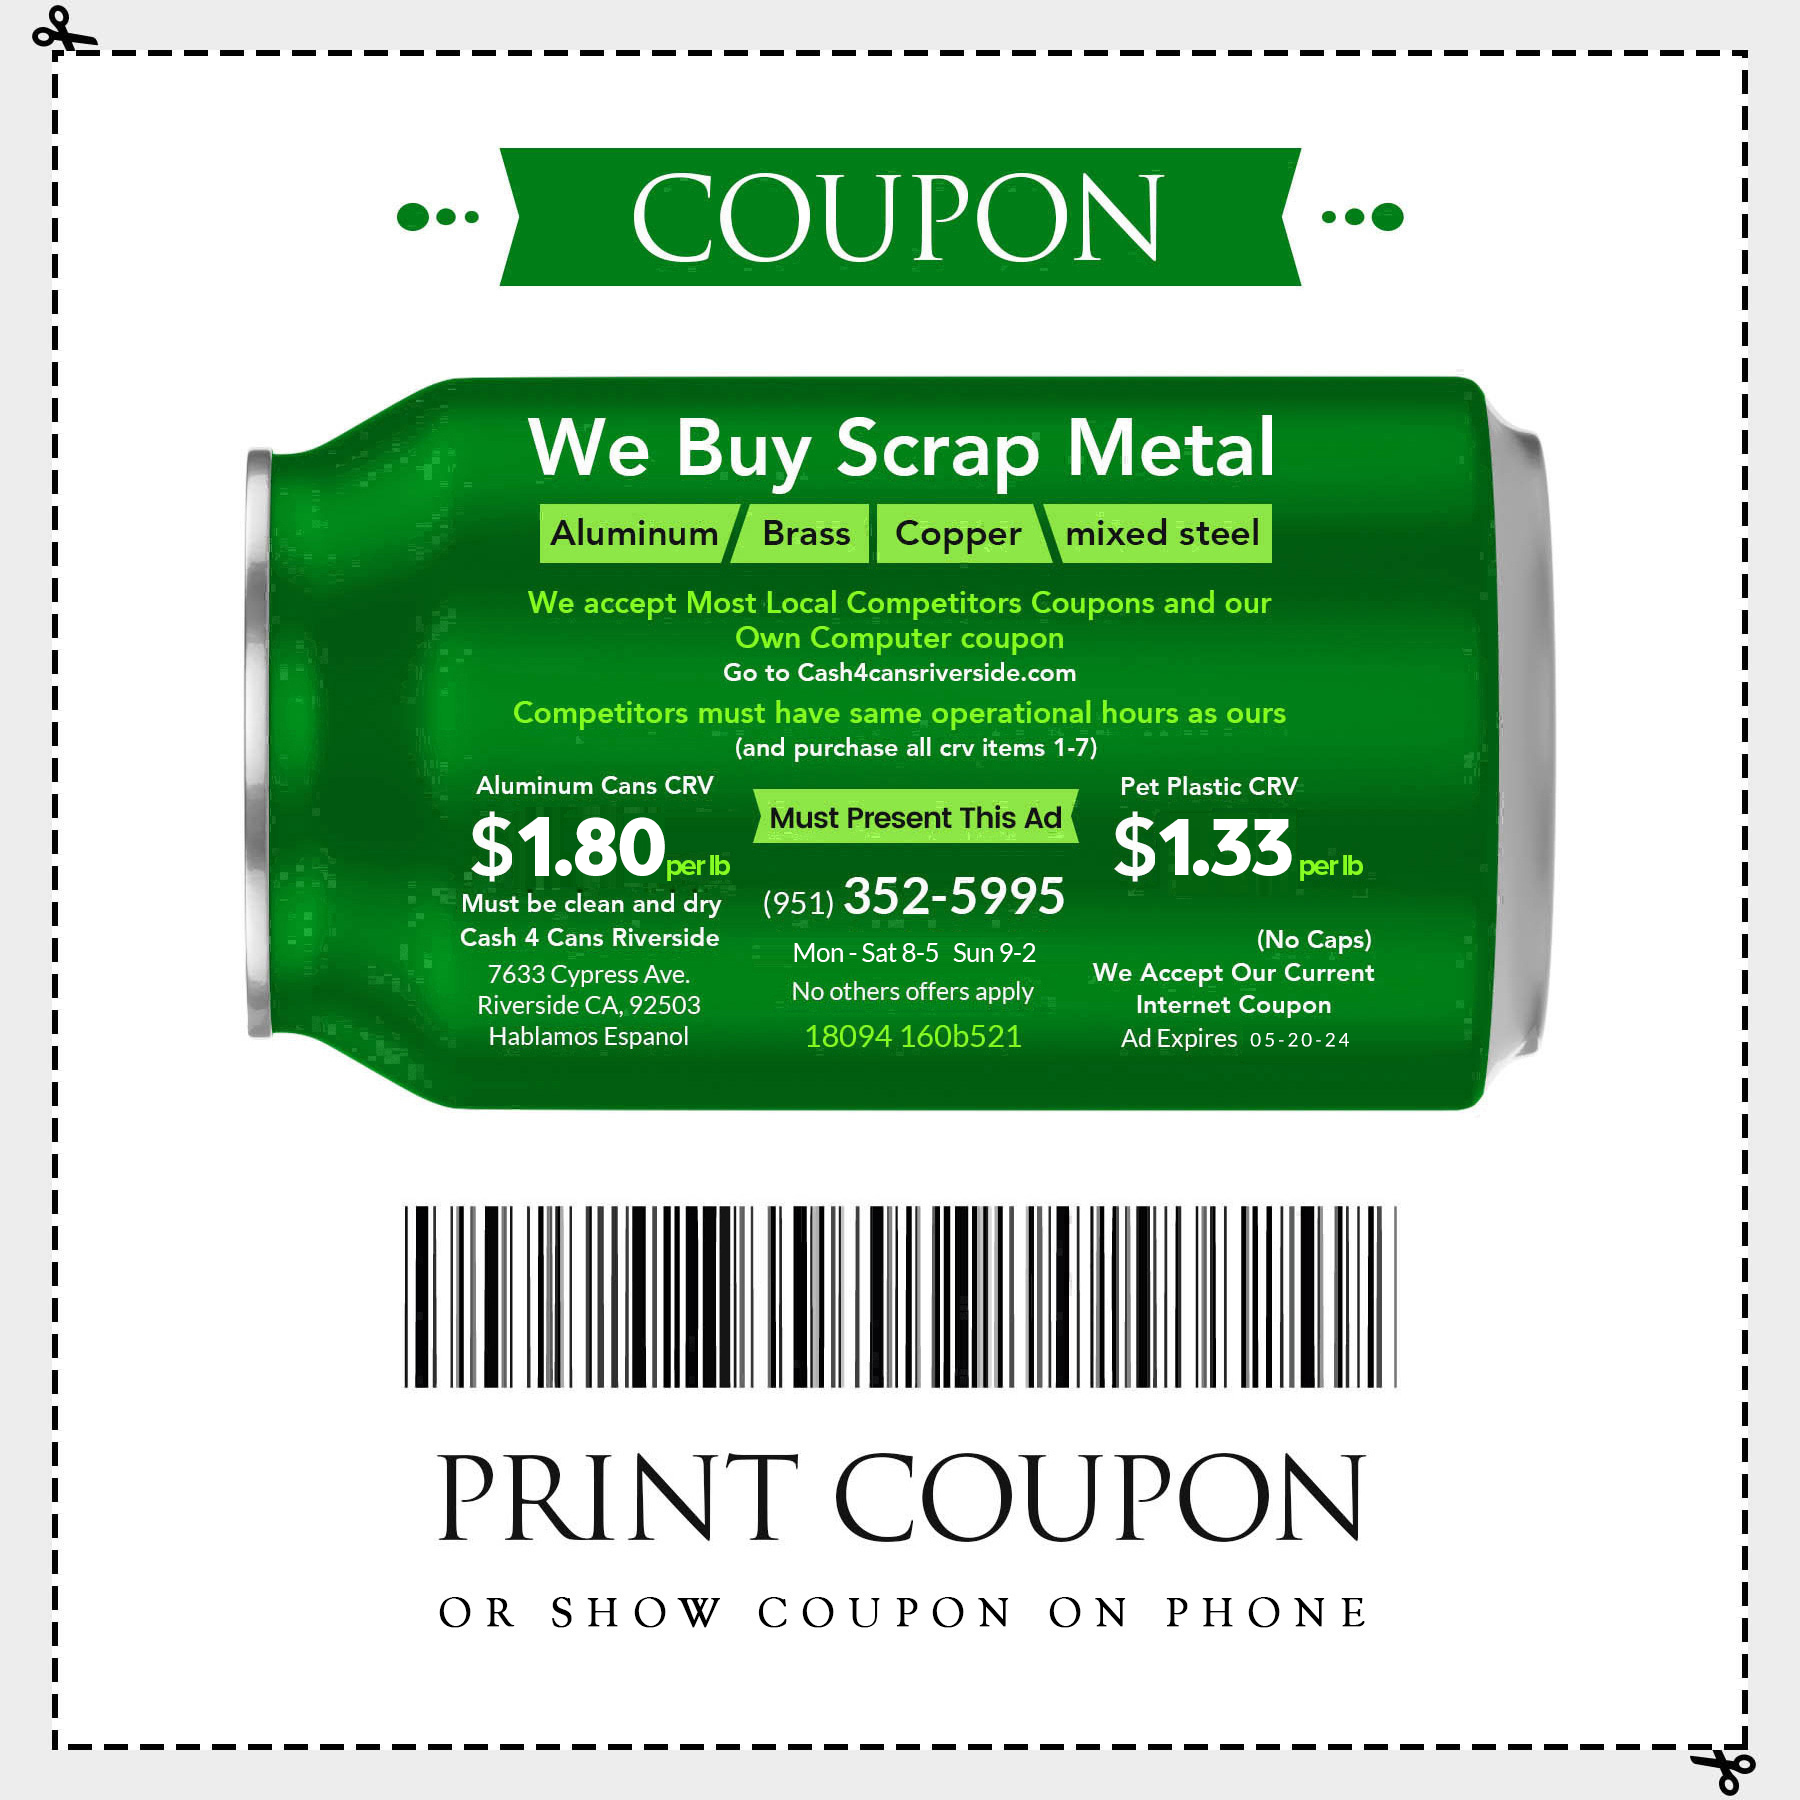 We buy scrap metal Aluminum, Brass, Copper, Mixed steel. We accept most local competitors coupons and our own computer coupon. Competitors must have same operational hours as ours (and purchase all crv items 1-7). One Must present this add. Aluminum Cans CRV $1.80 per lb and Pet Plastic CRV $1.33 per lb.